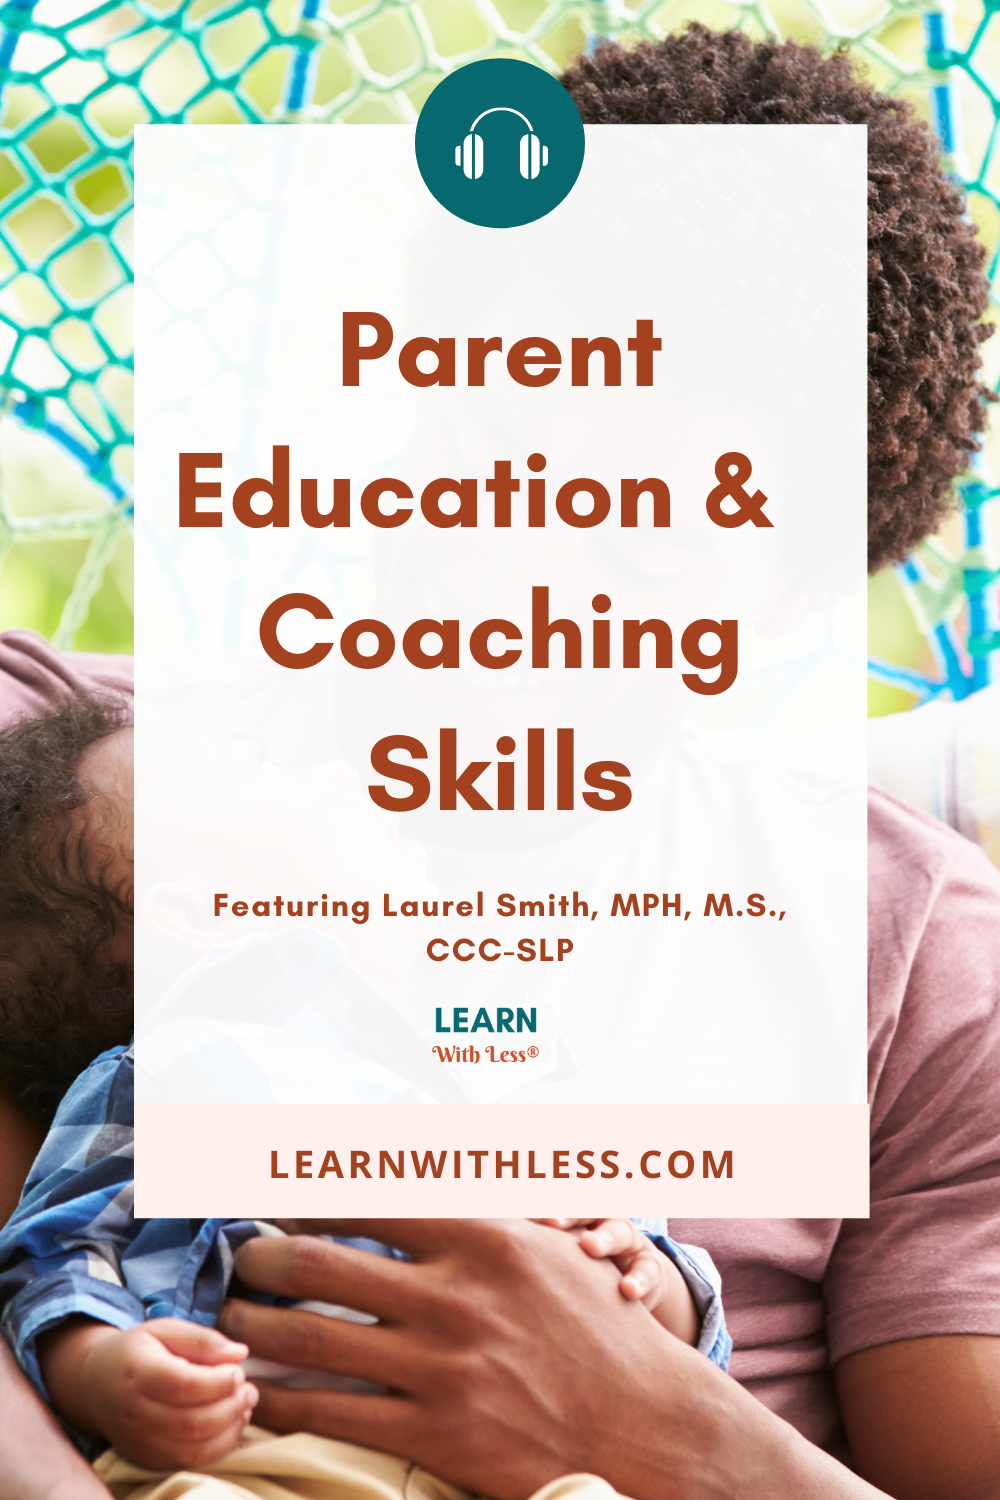 How to Impact Your Community With Parent Education and Parent Coaching Skills, with Laurel Smith